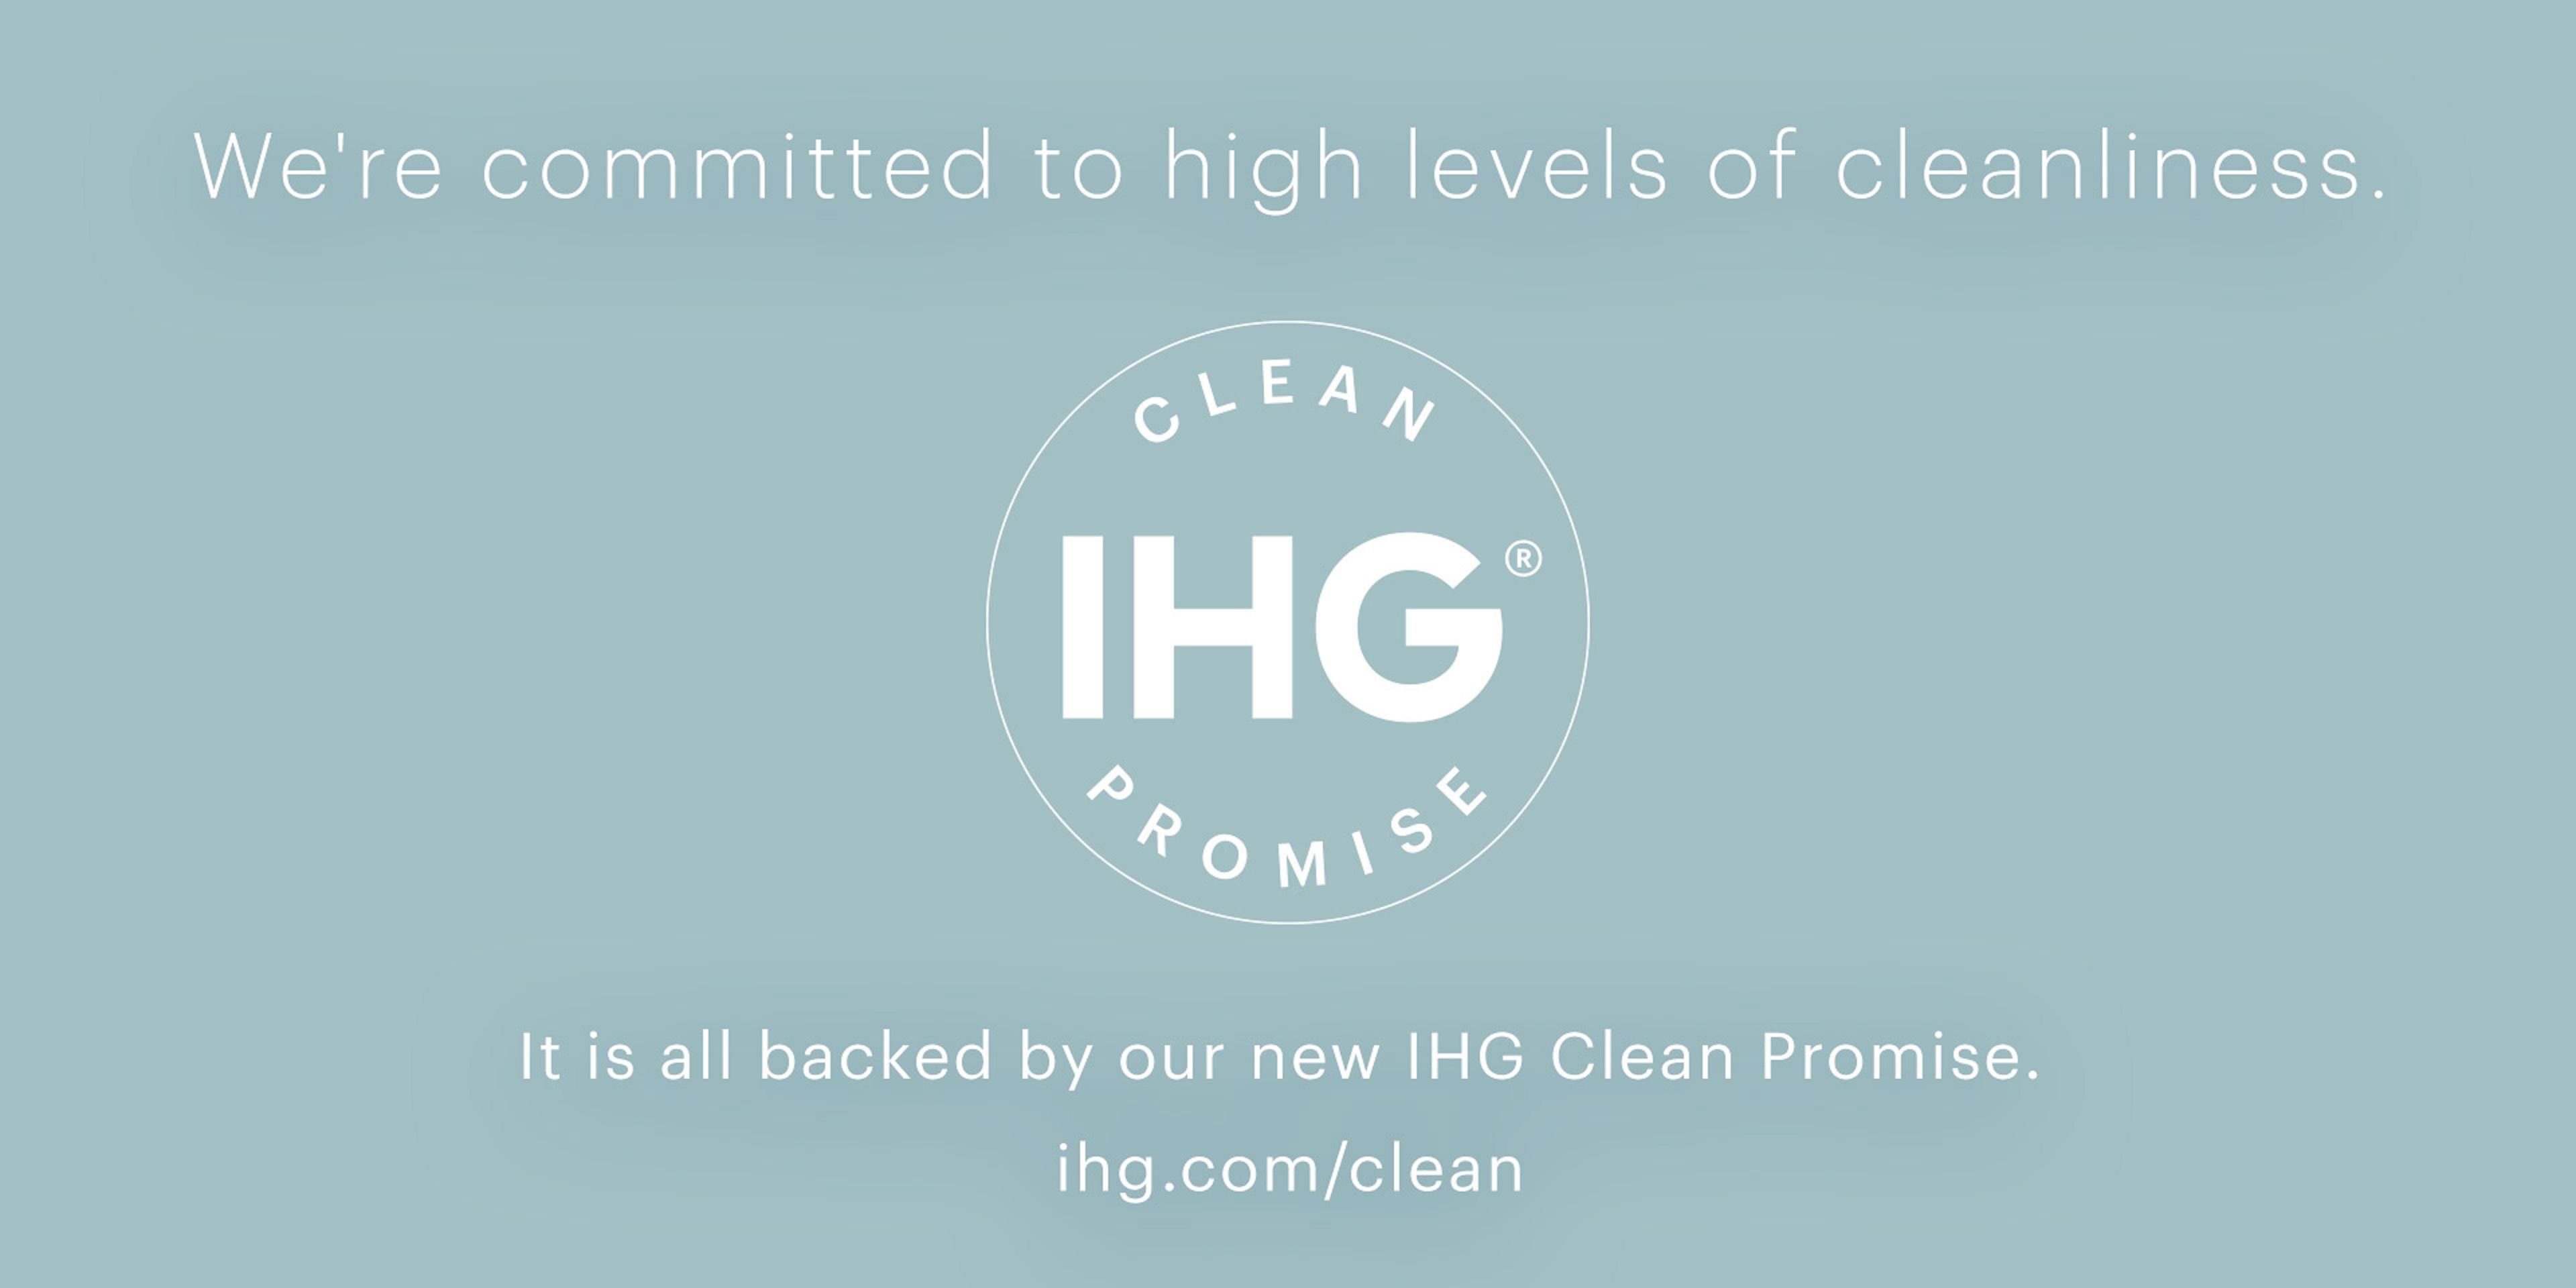 We're committed to high levels of cleanliness. It is all backed by our new IHG Clean Promise.